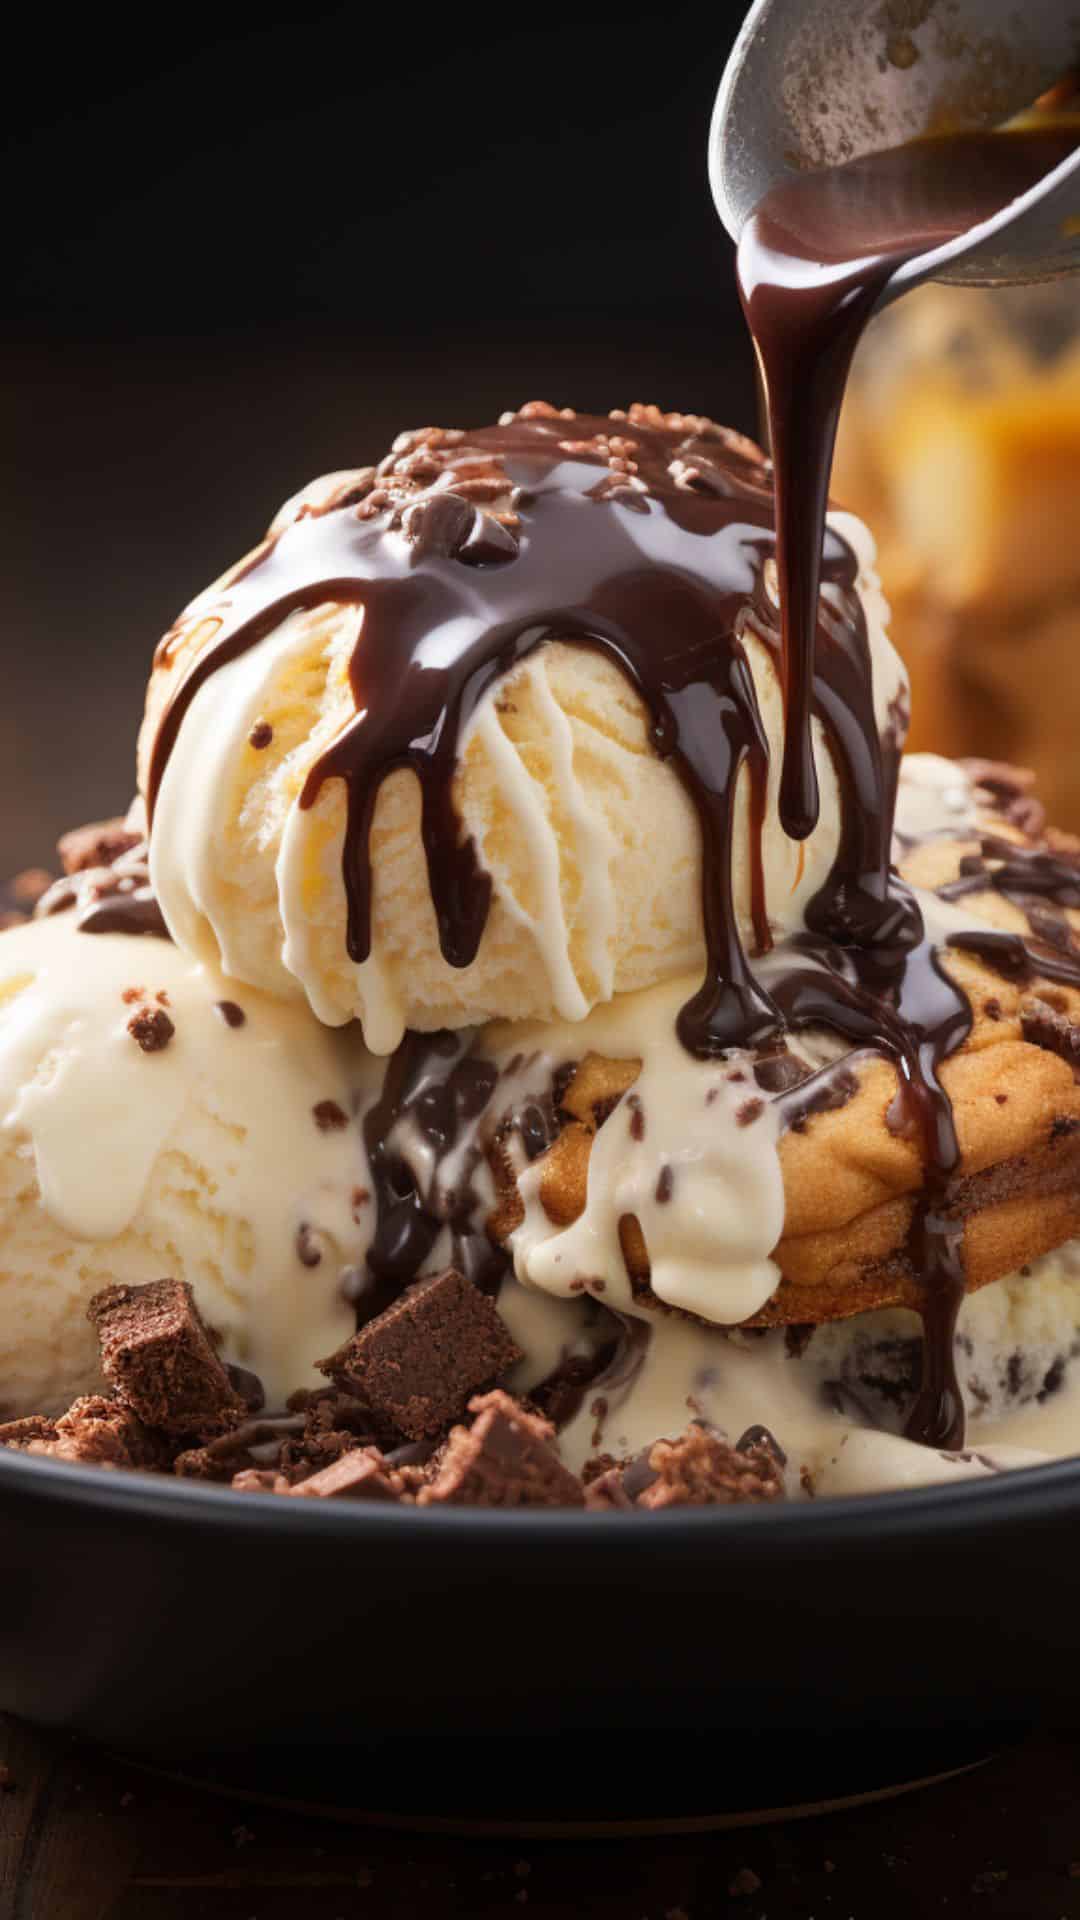 Desserts to use the classic hot fudge sauce on